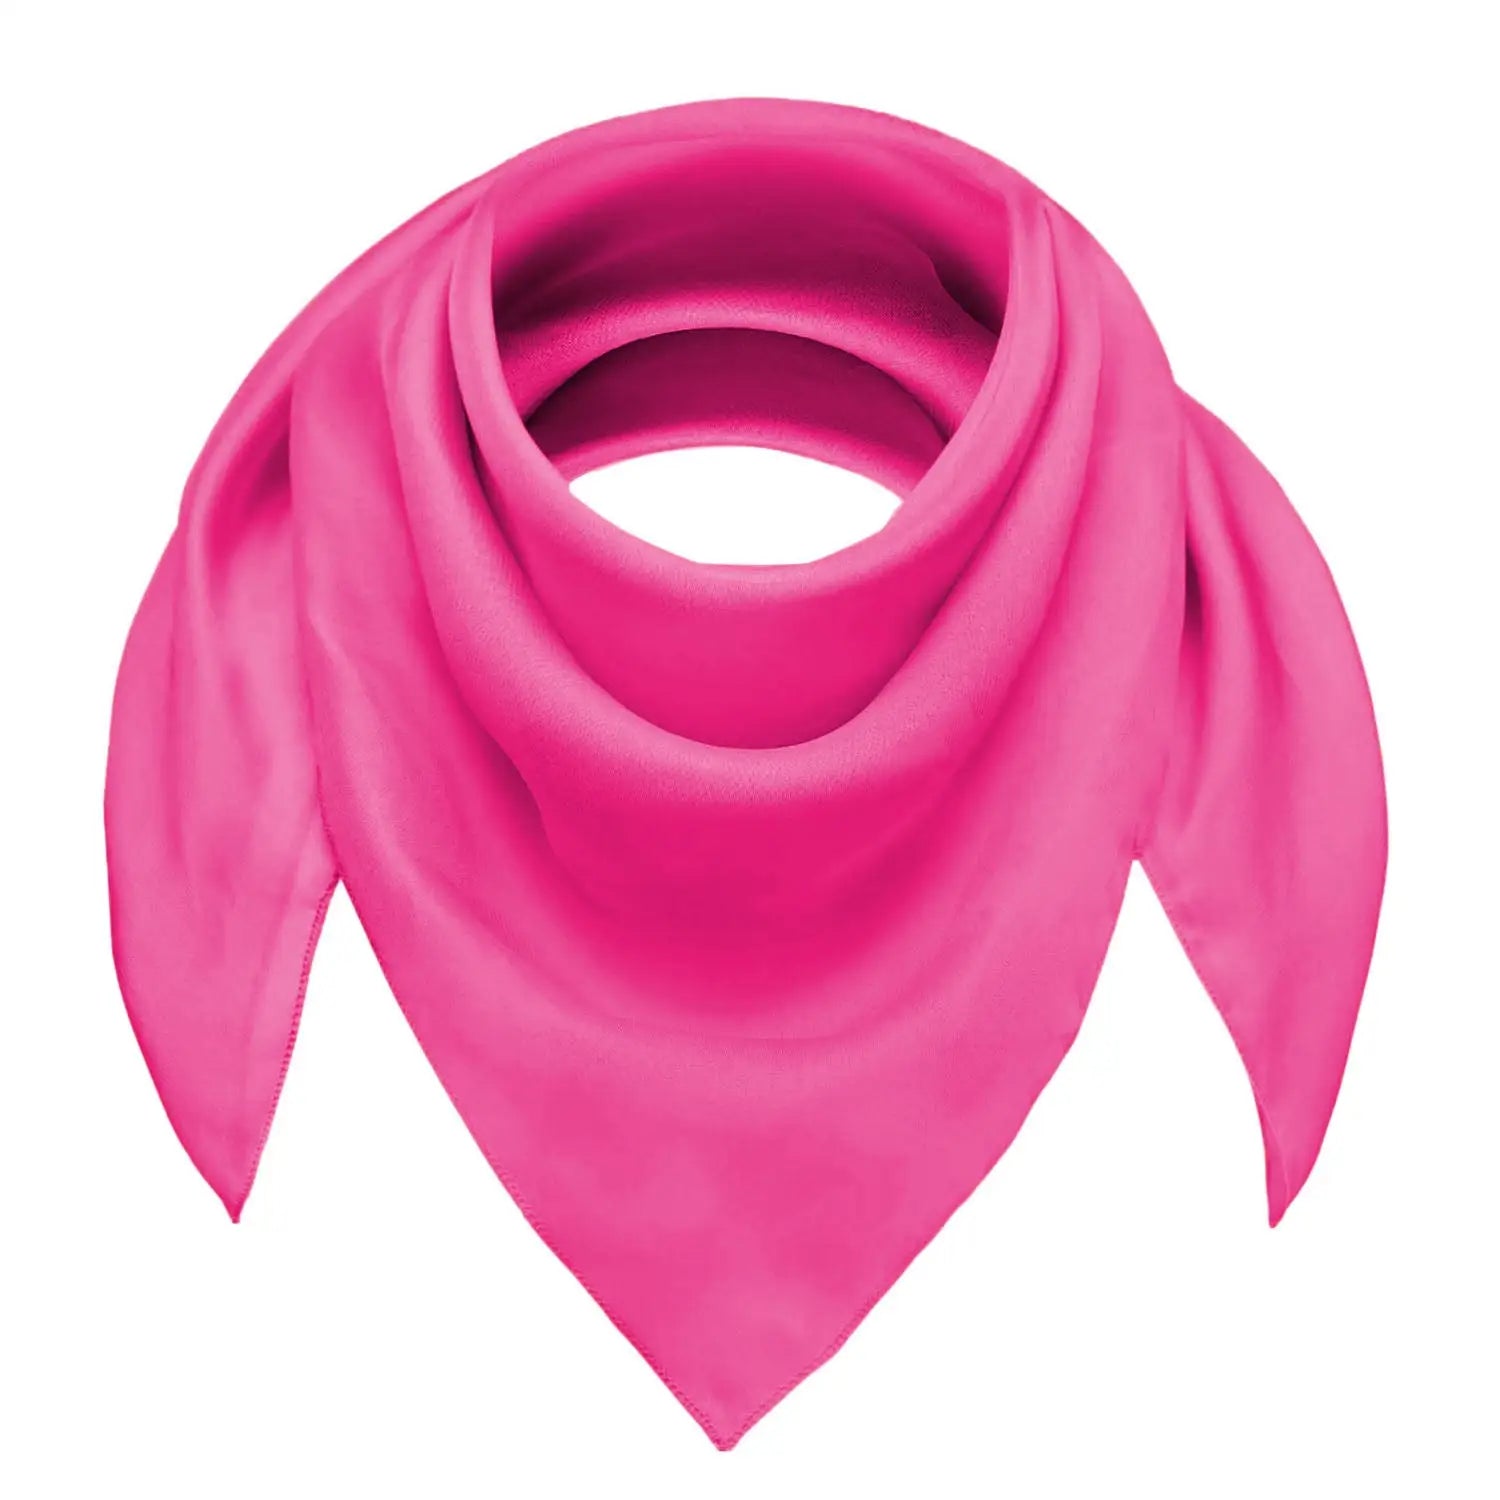 Pink chiffon square scarf on white background - Lightweight, Square Neck Scarf for Women